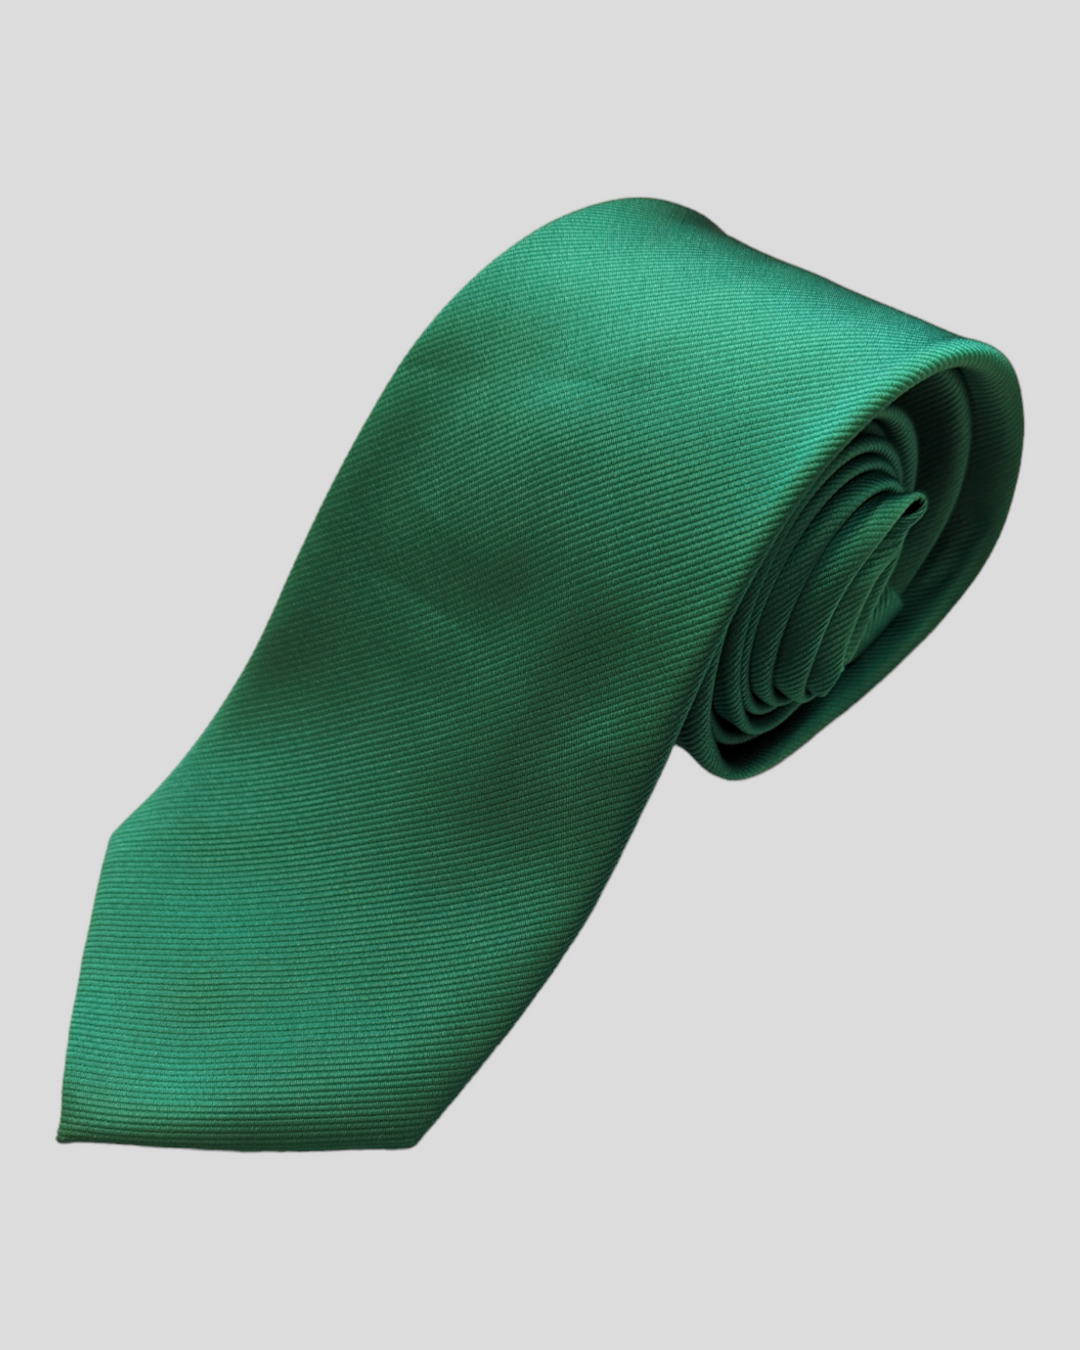 a solidgreen necktie lies coiled and ready to pounce. not really, just put it on.